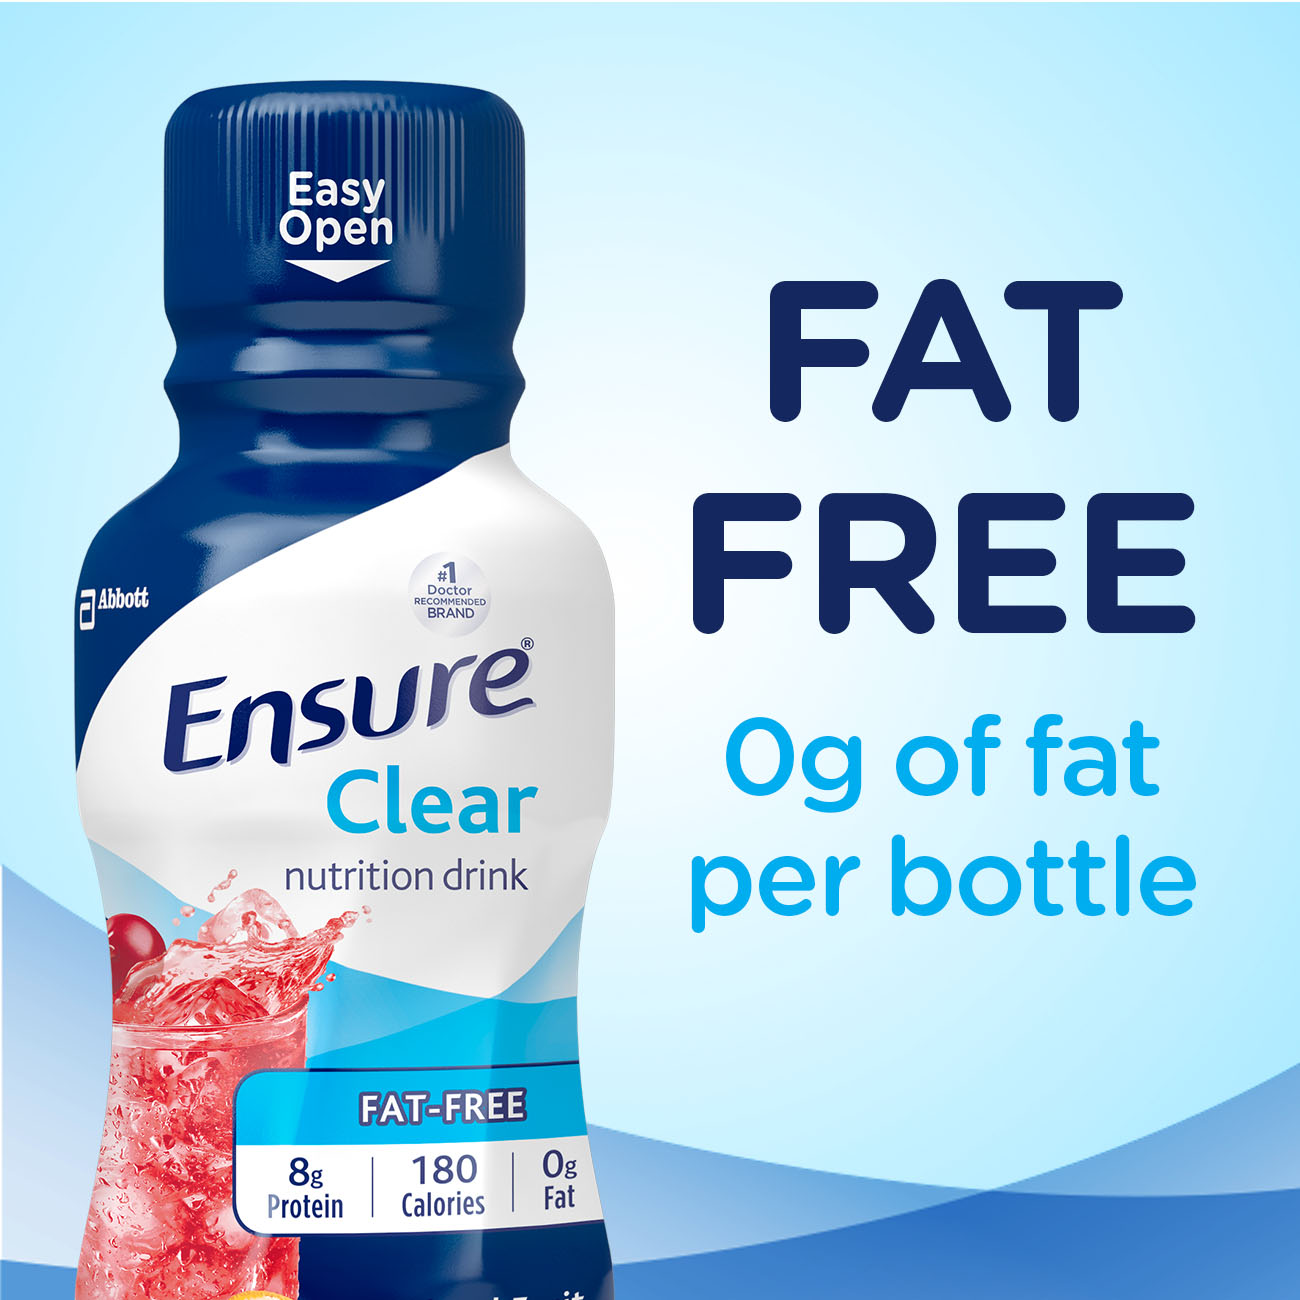 Ensure Clear Nutrition Drink, Mixed Fruit, 10 fl oz, 12 Count - image 2 of 8